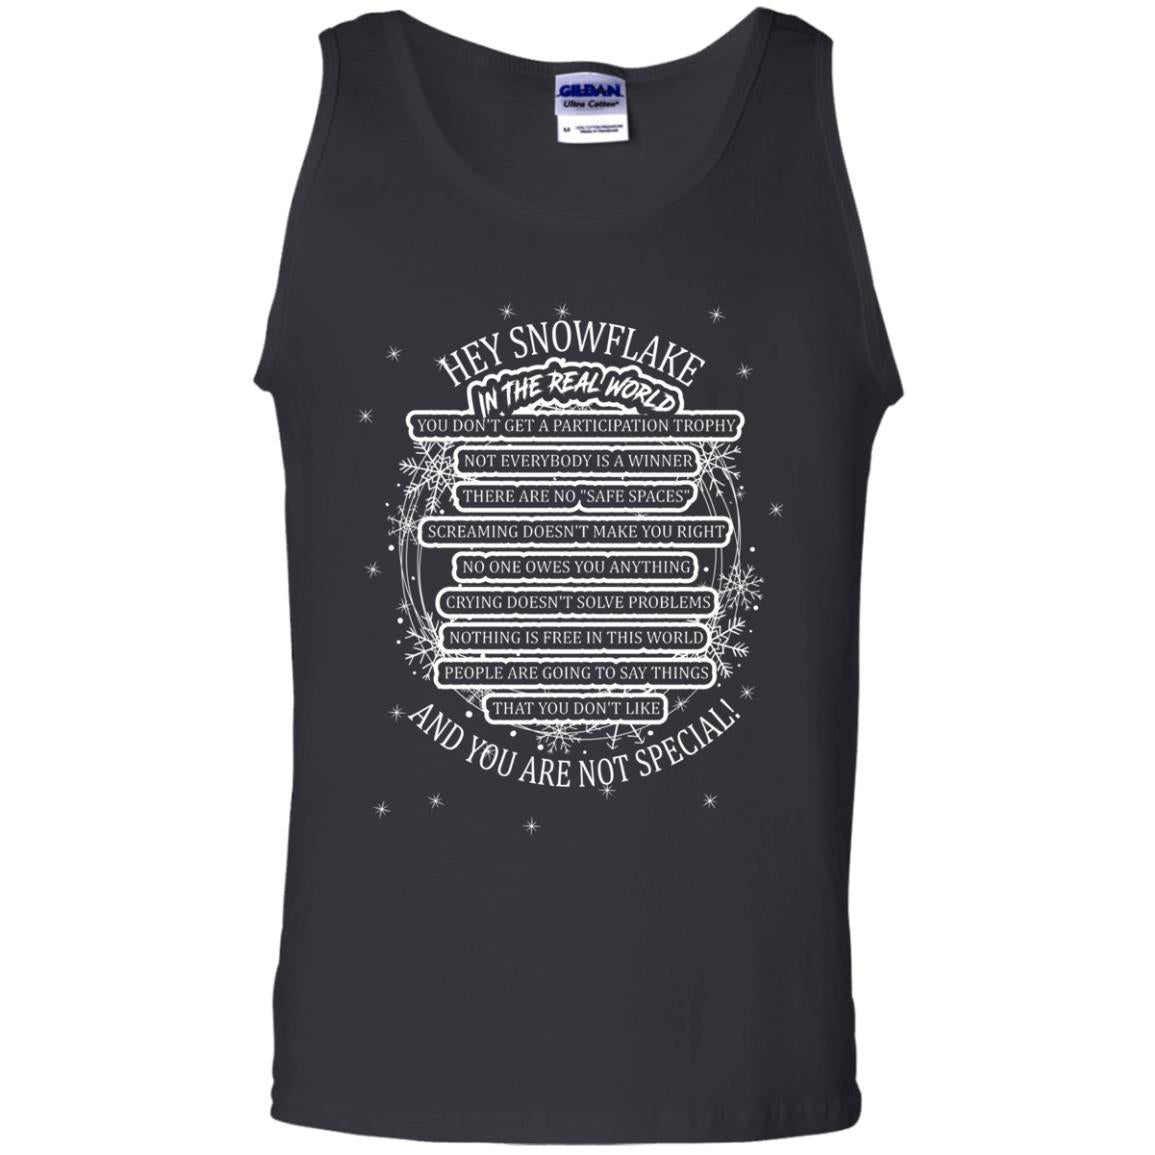 Hey Snowflake In The Real World You Don_t Get A Participation Trophy Military T-shirtG220 Gildan 100% Cotton Tank Top